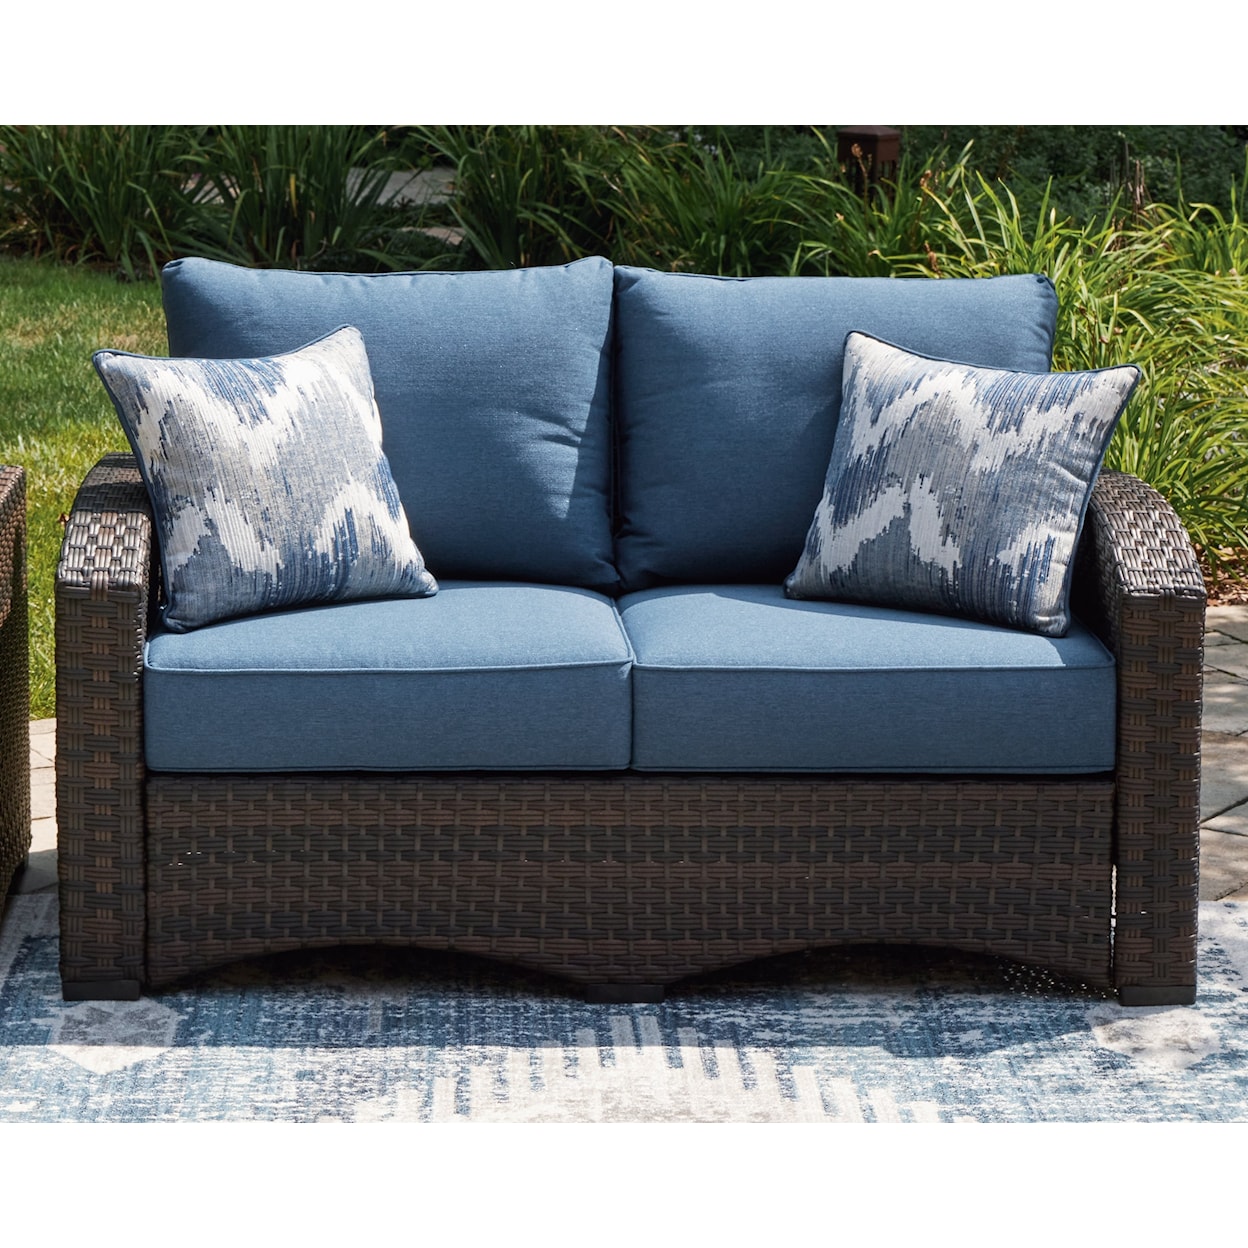 Signature Design by Ashley Windglow Outdoor Loveseat with Cushion